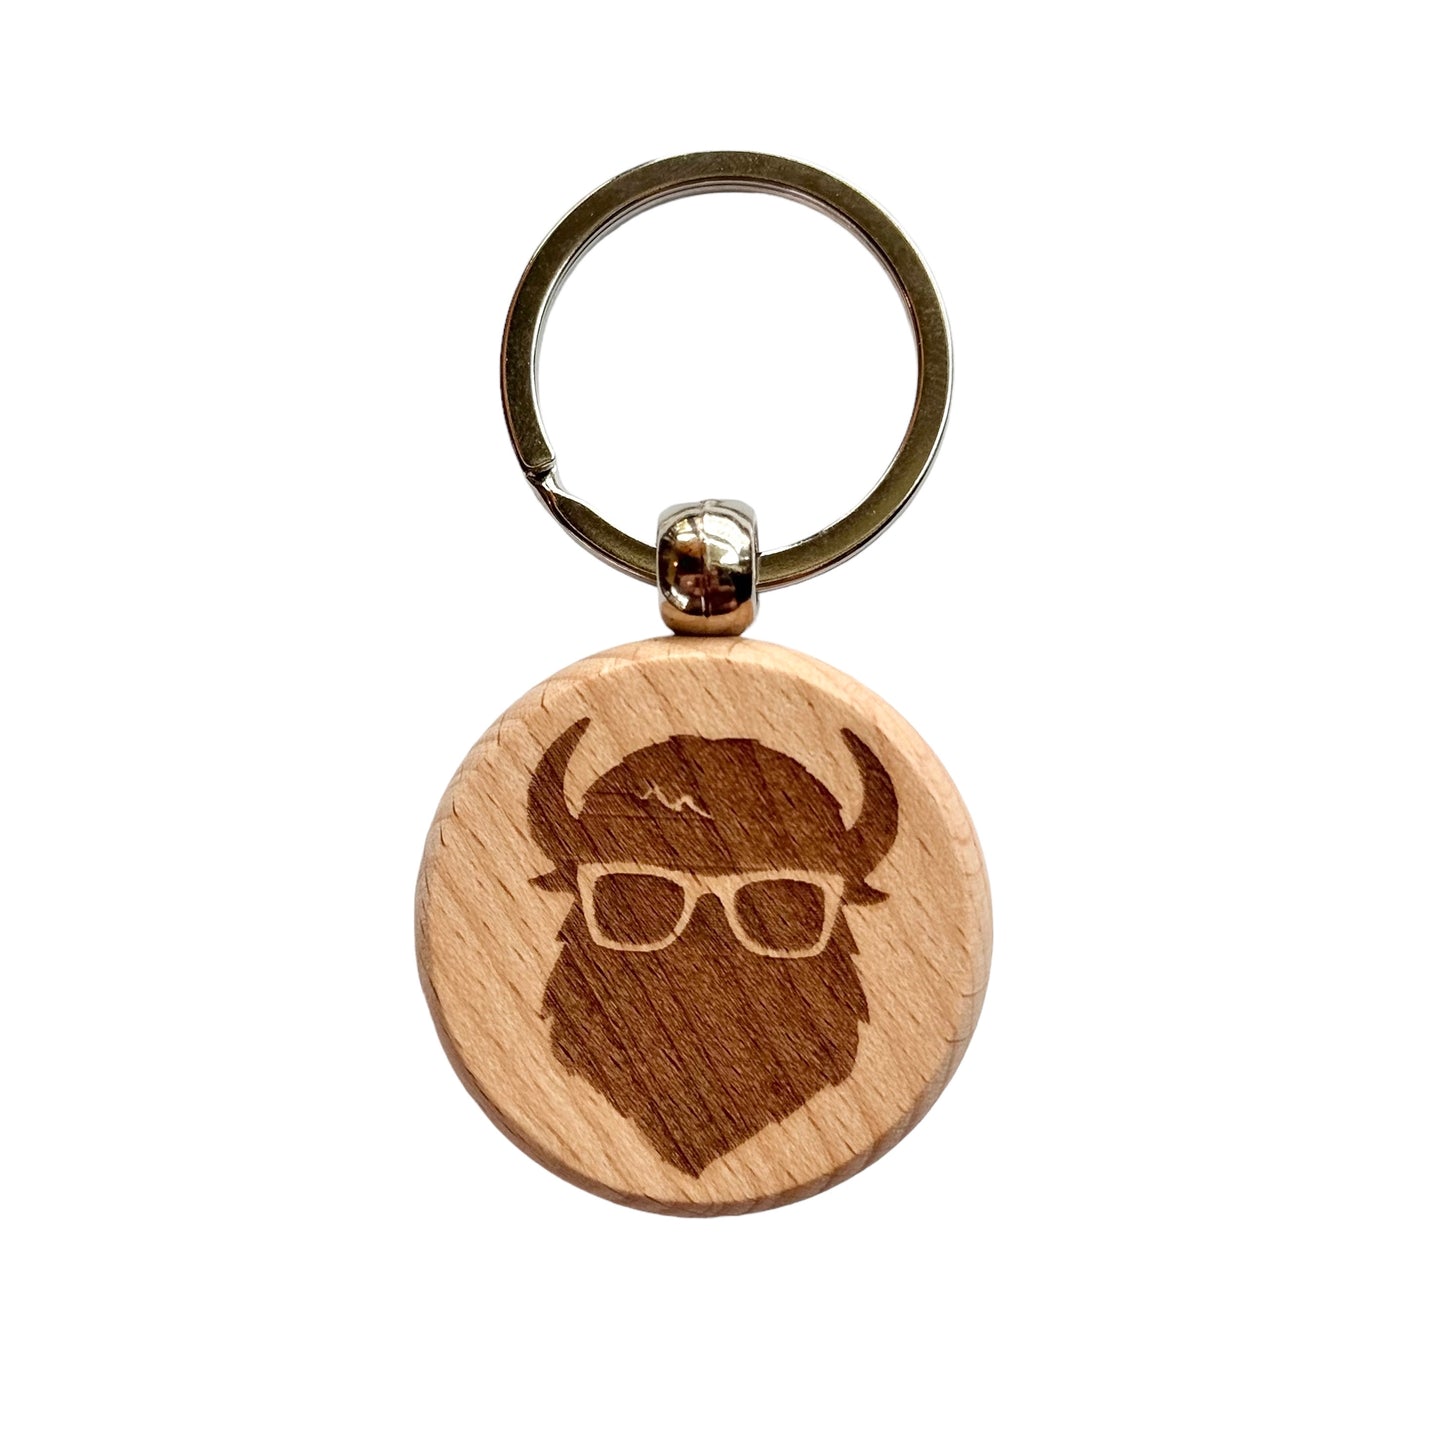 The Curious Bison Keychain